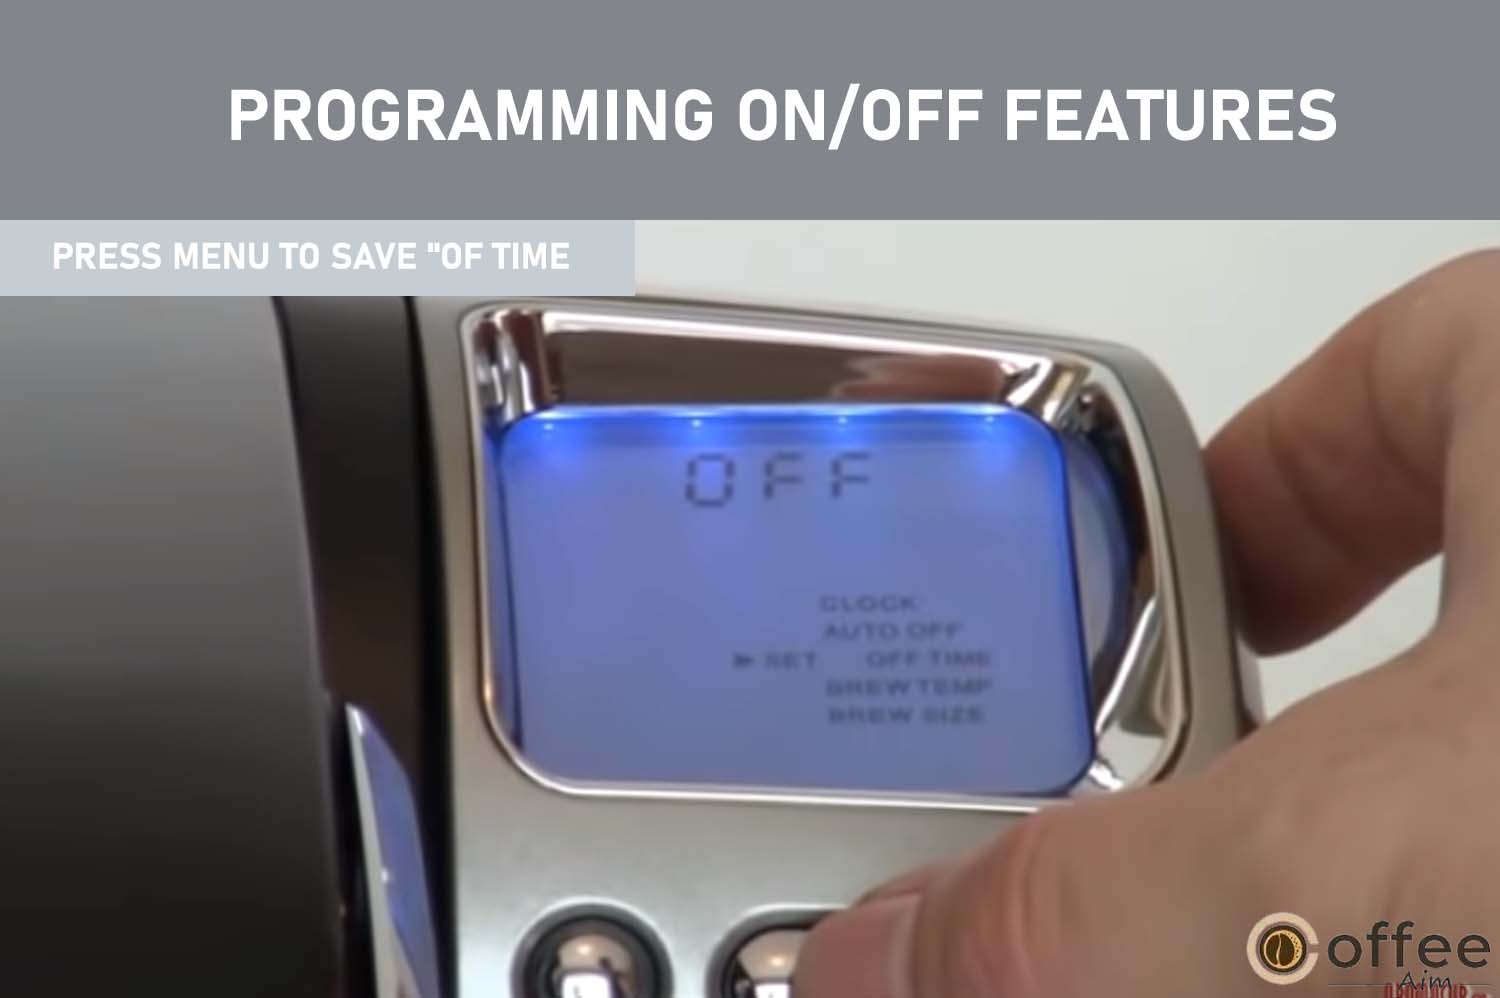 After setting the desired "ON TIME," press the MENU Button to save the setting and proceed to the "SET OFF TIME" option in the programming mode.